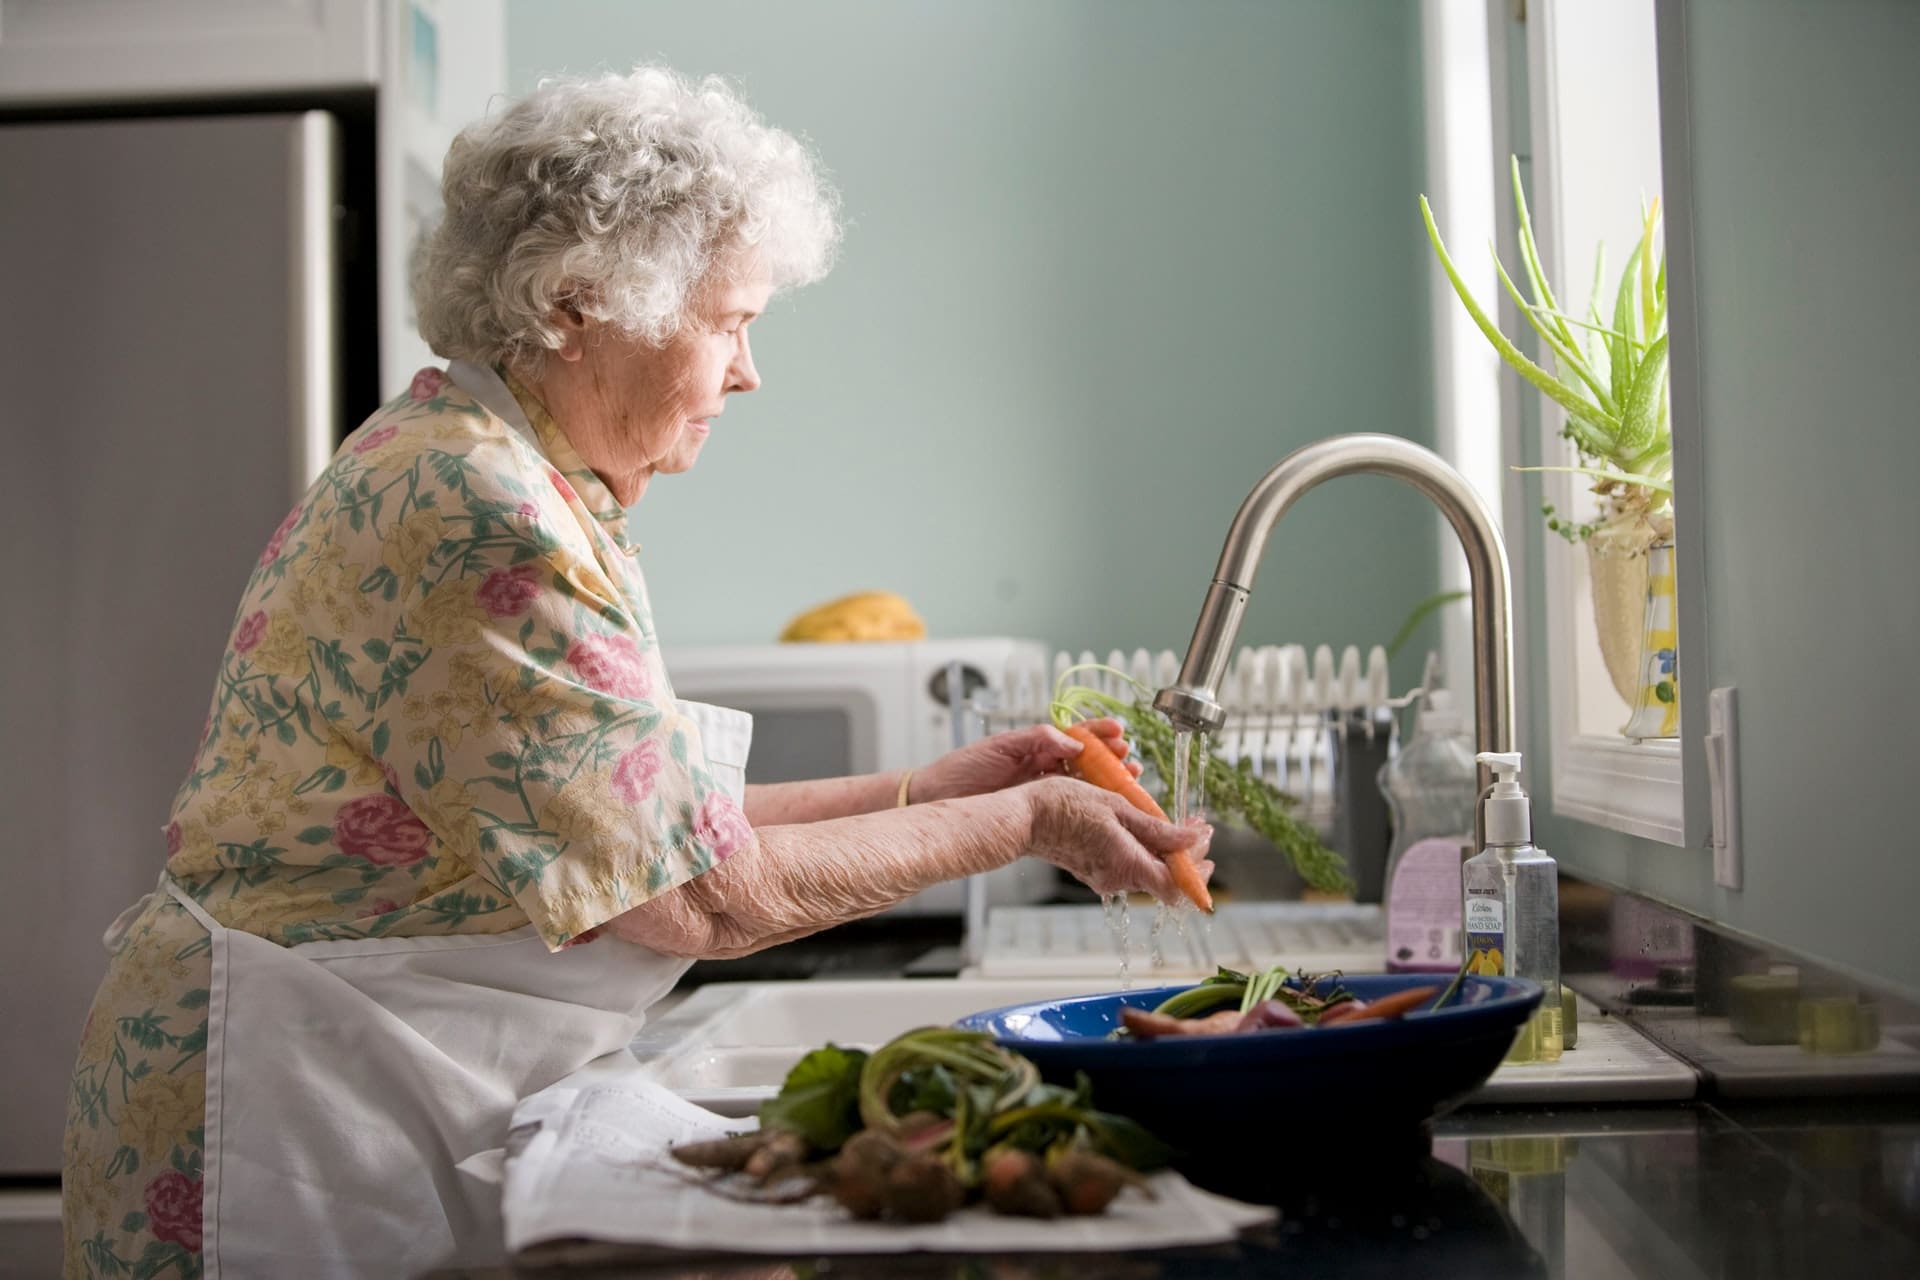 An elderly lady wearing an apron washing carrots in the kitchen sink.